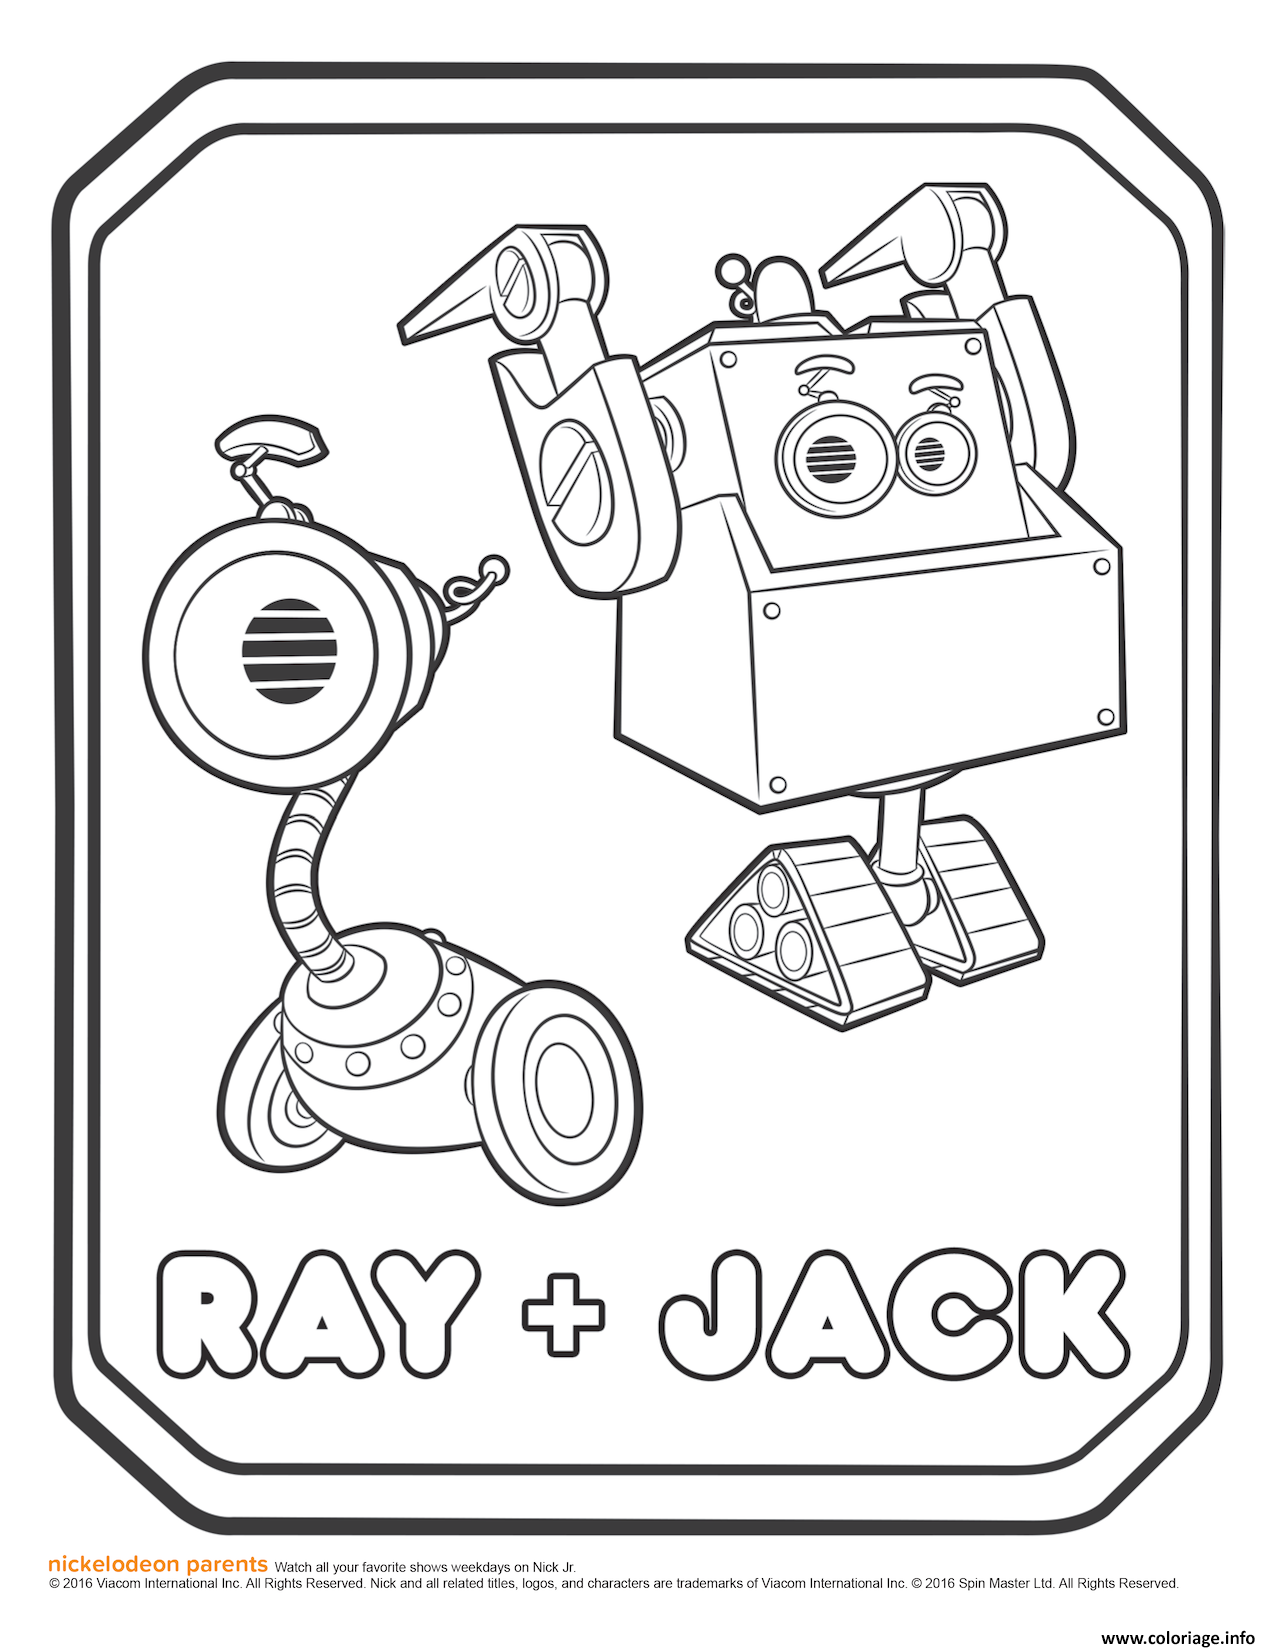 Coloriage Rusty Rivets Ray and Jack Coloring Page - JeColorie.com